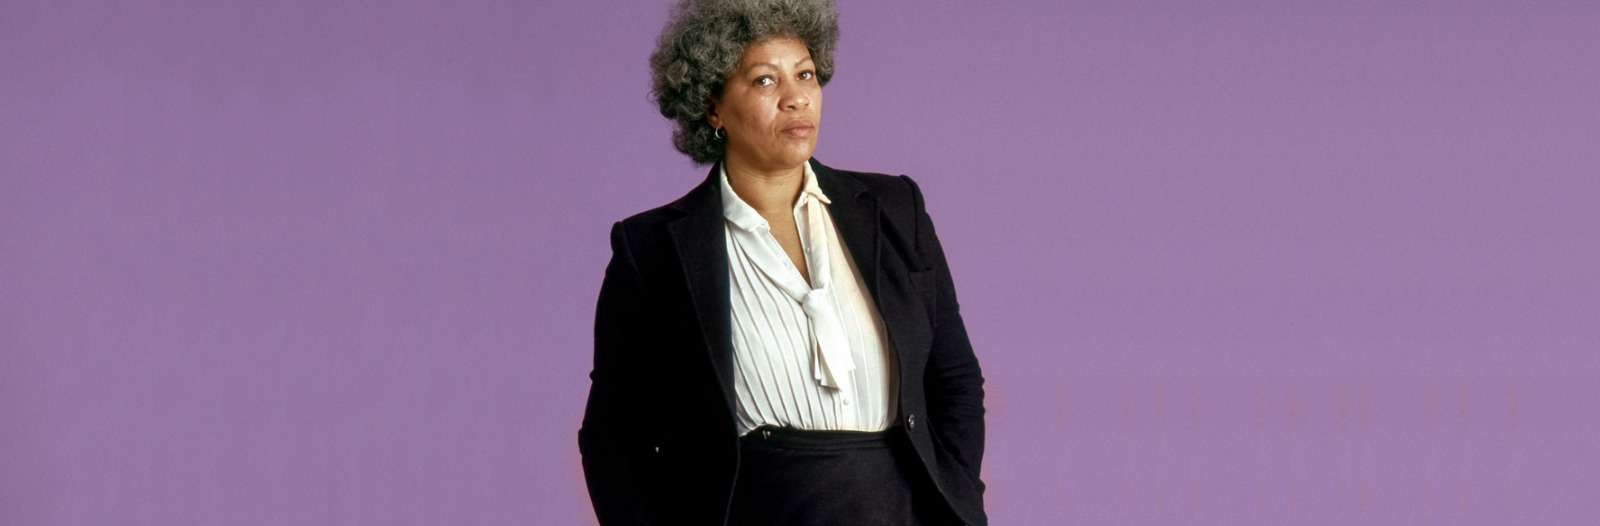 Toni Morrison in front of purple background